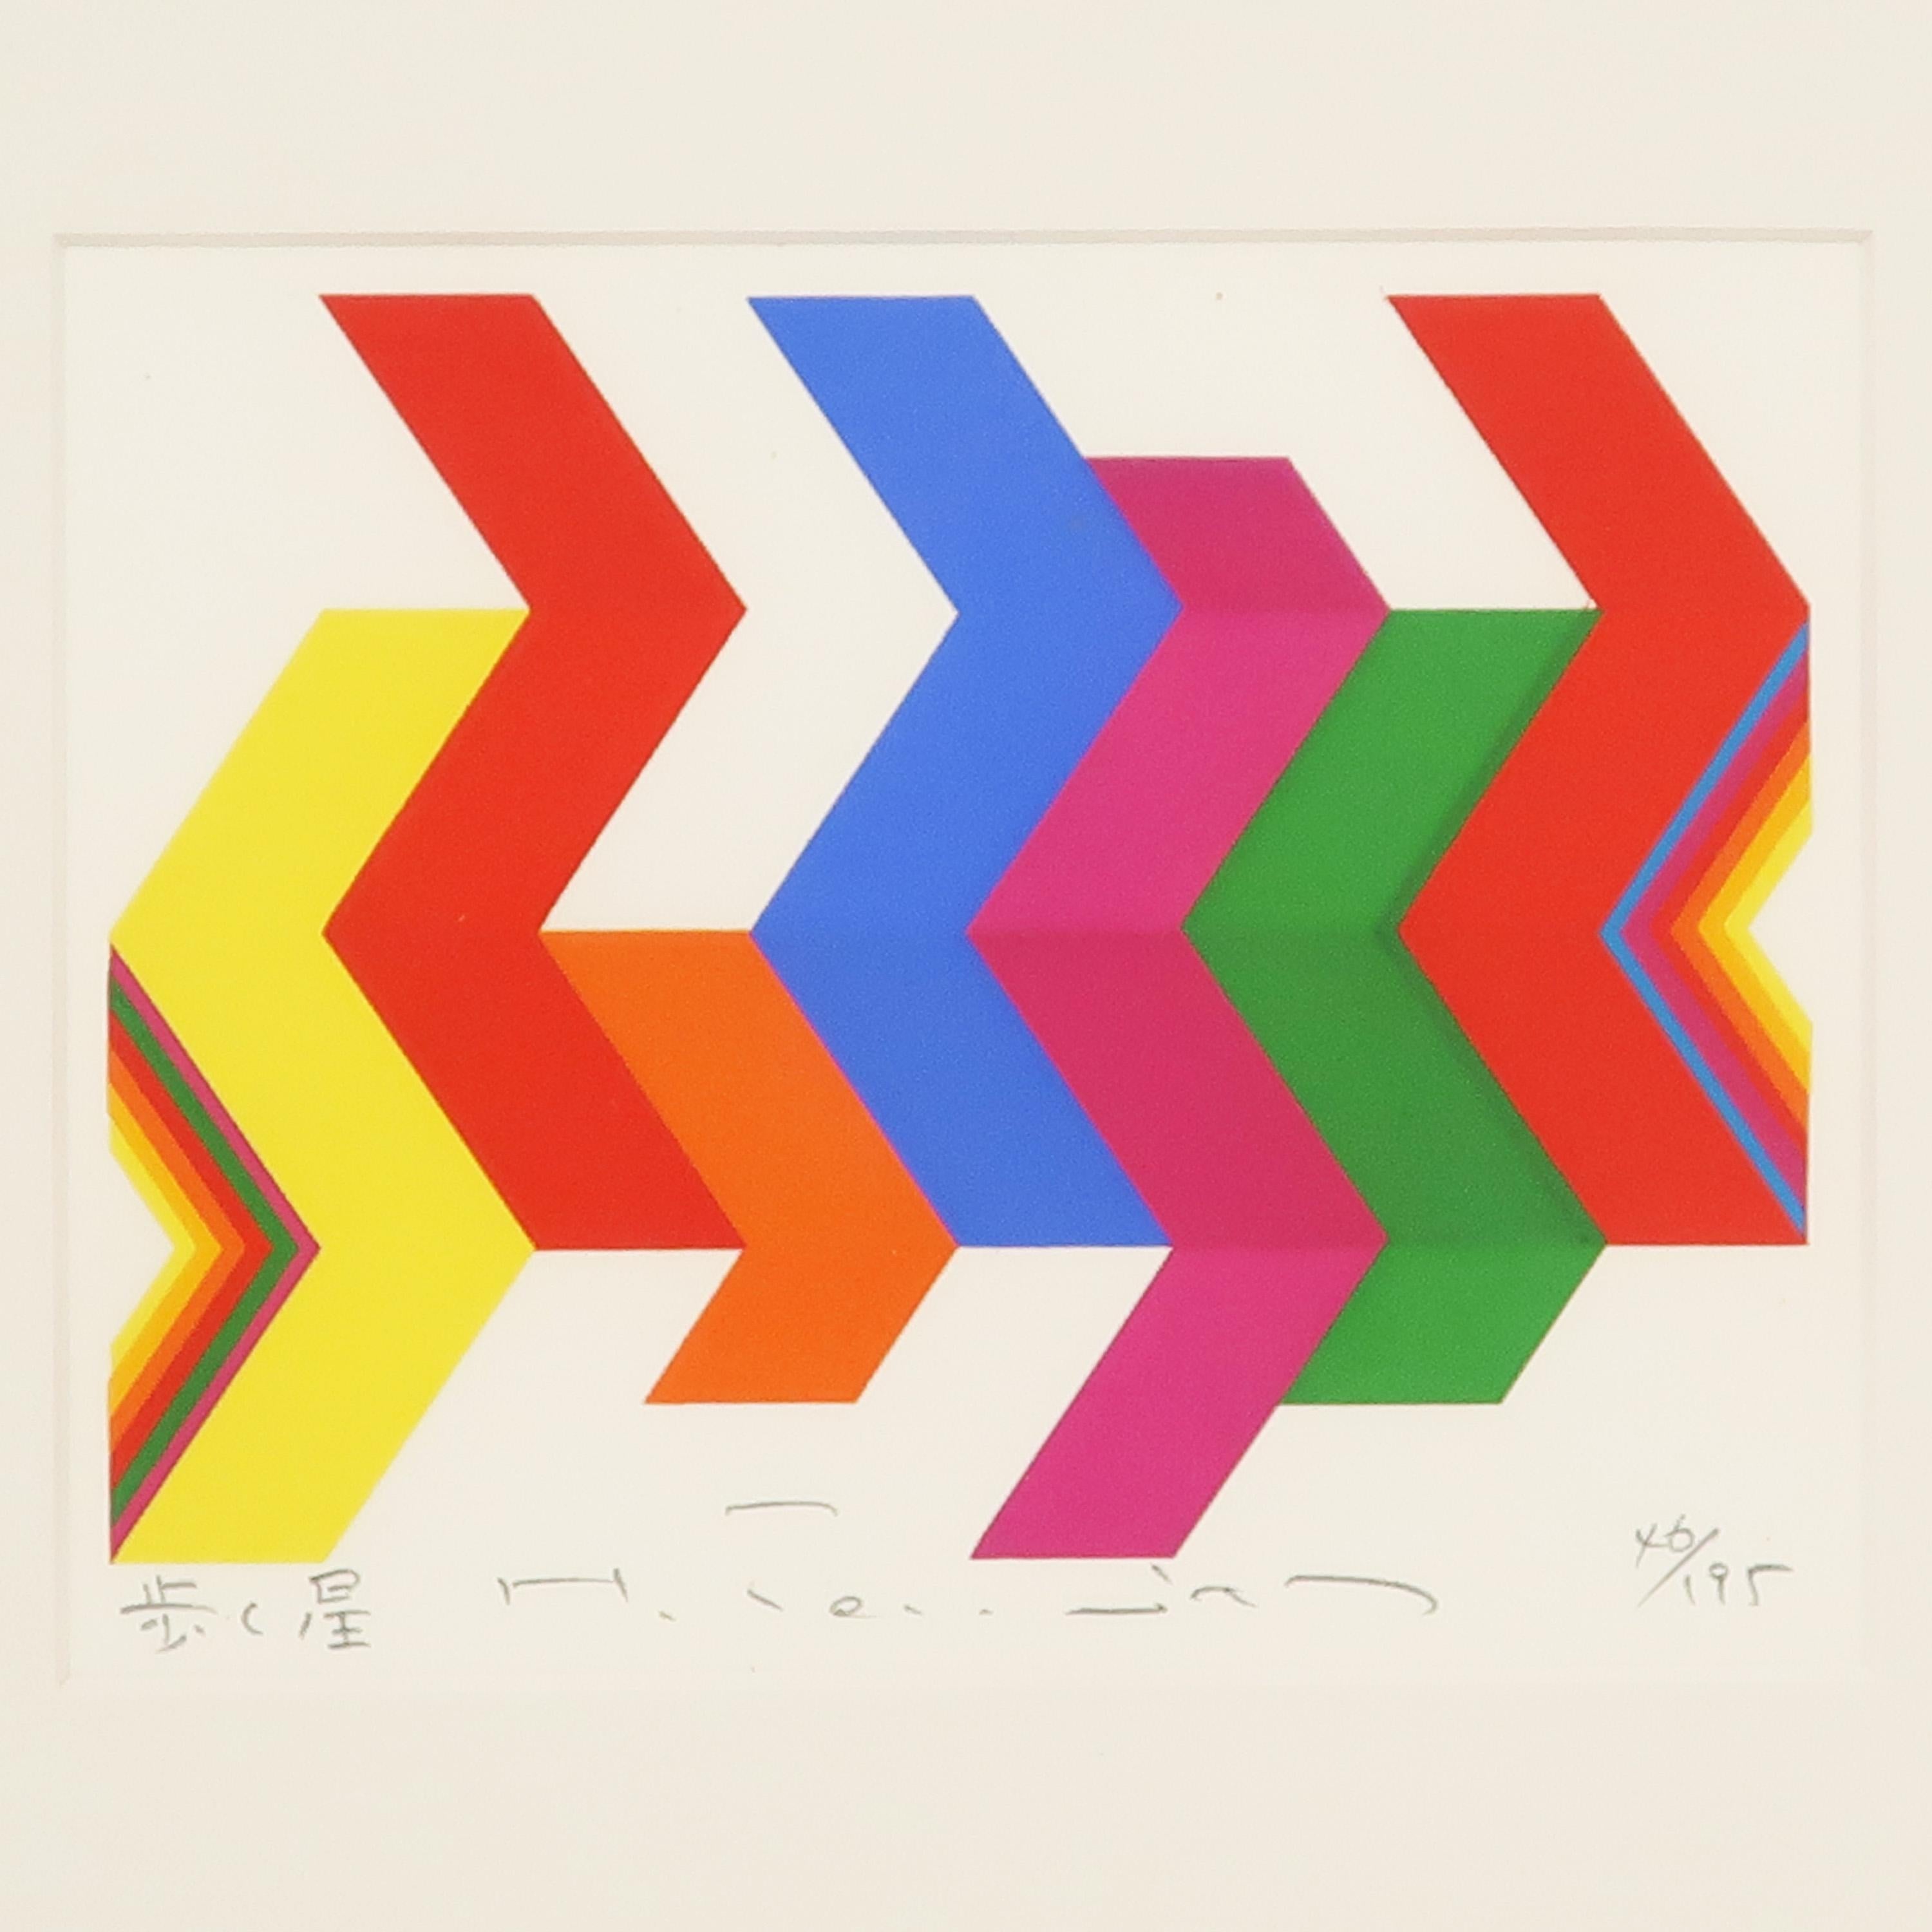 Born in 1934, Japanese silkscreen printer Fumio Tomita was particularly fond of and skilled at creating simple colored abstract and geometric shapes, often against a light background. “Walking Star” is a perfect example of his work, which can be